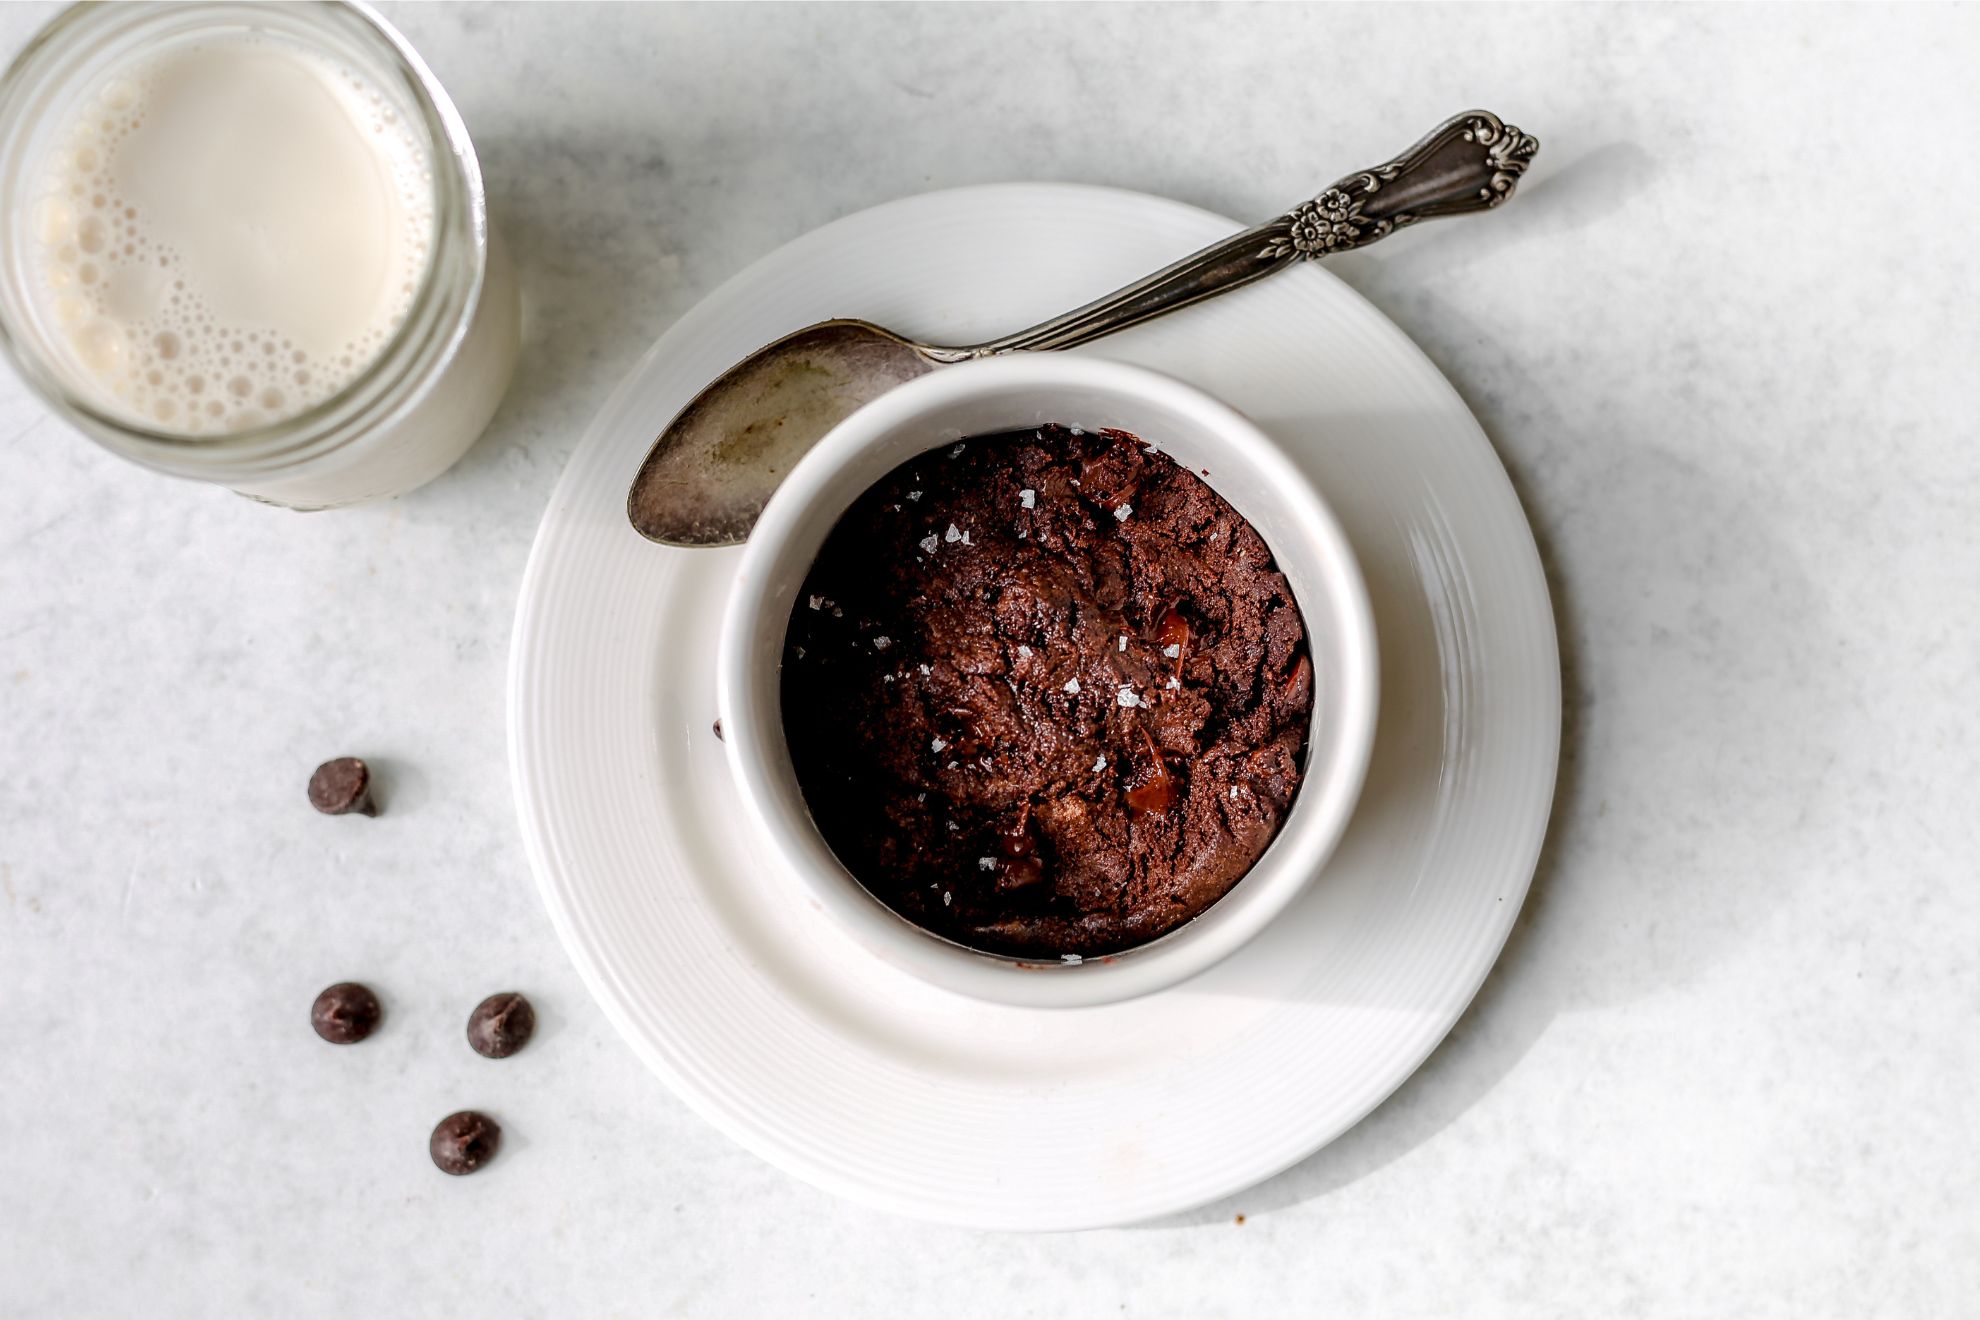 This is a horizontal overhead shot of a white ramekin with a brownie in it. The ramekin sits on a white plate with a silver spoon leaning against the side. The plate sits on a light grey surface with four chocolate chips to the left of it and a glass of milk to the top left corner of the image.